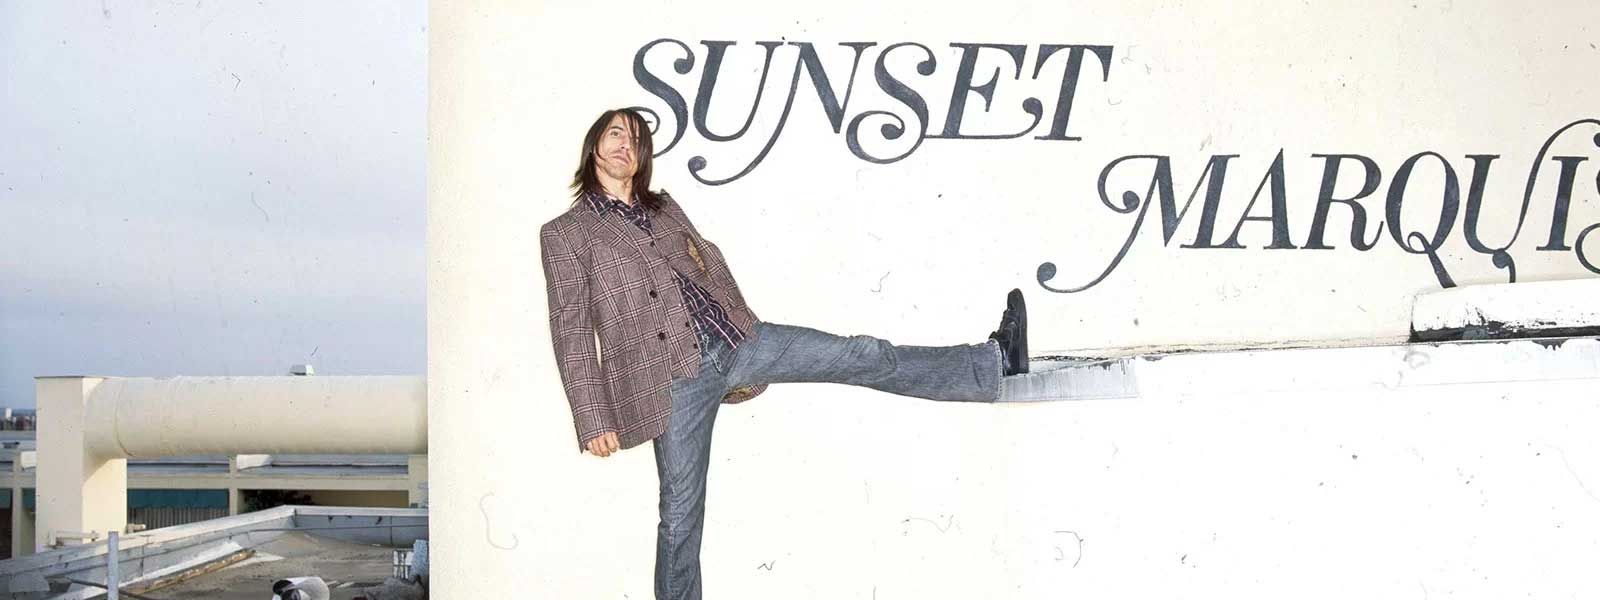 anthony kiedis with the sunset marquis sign